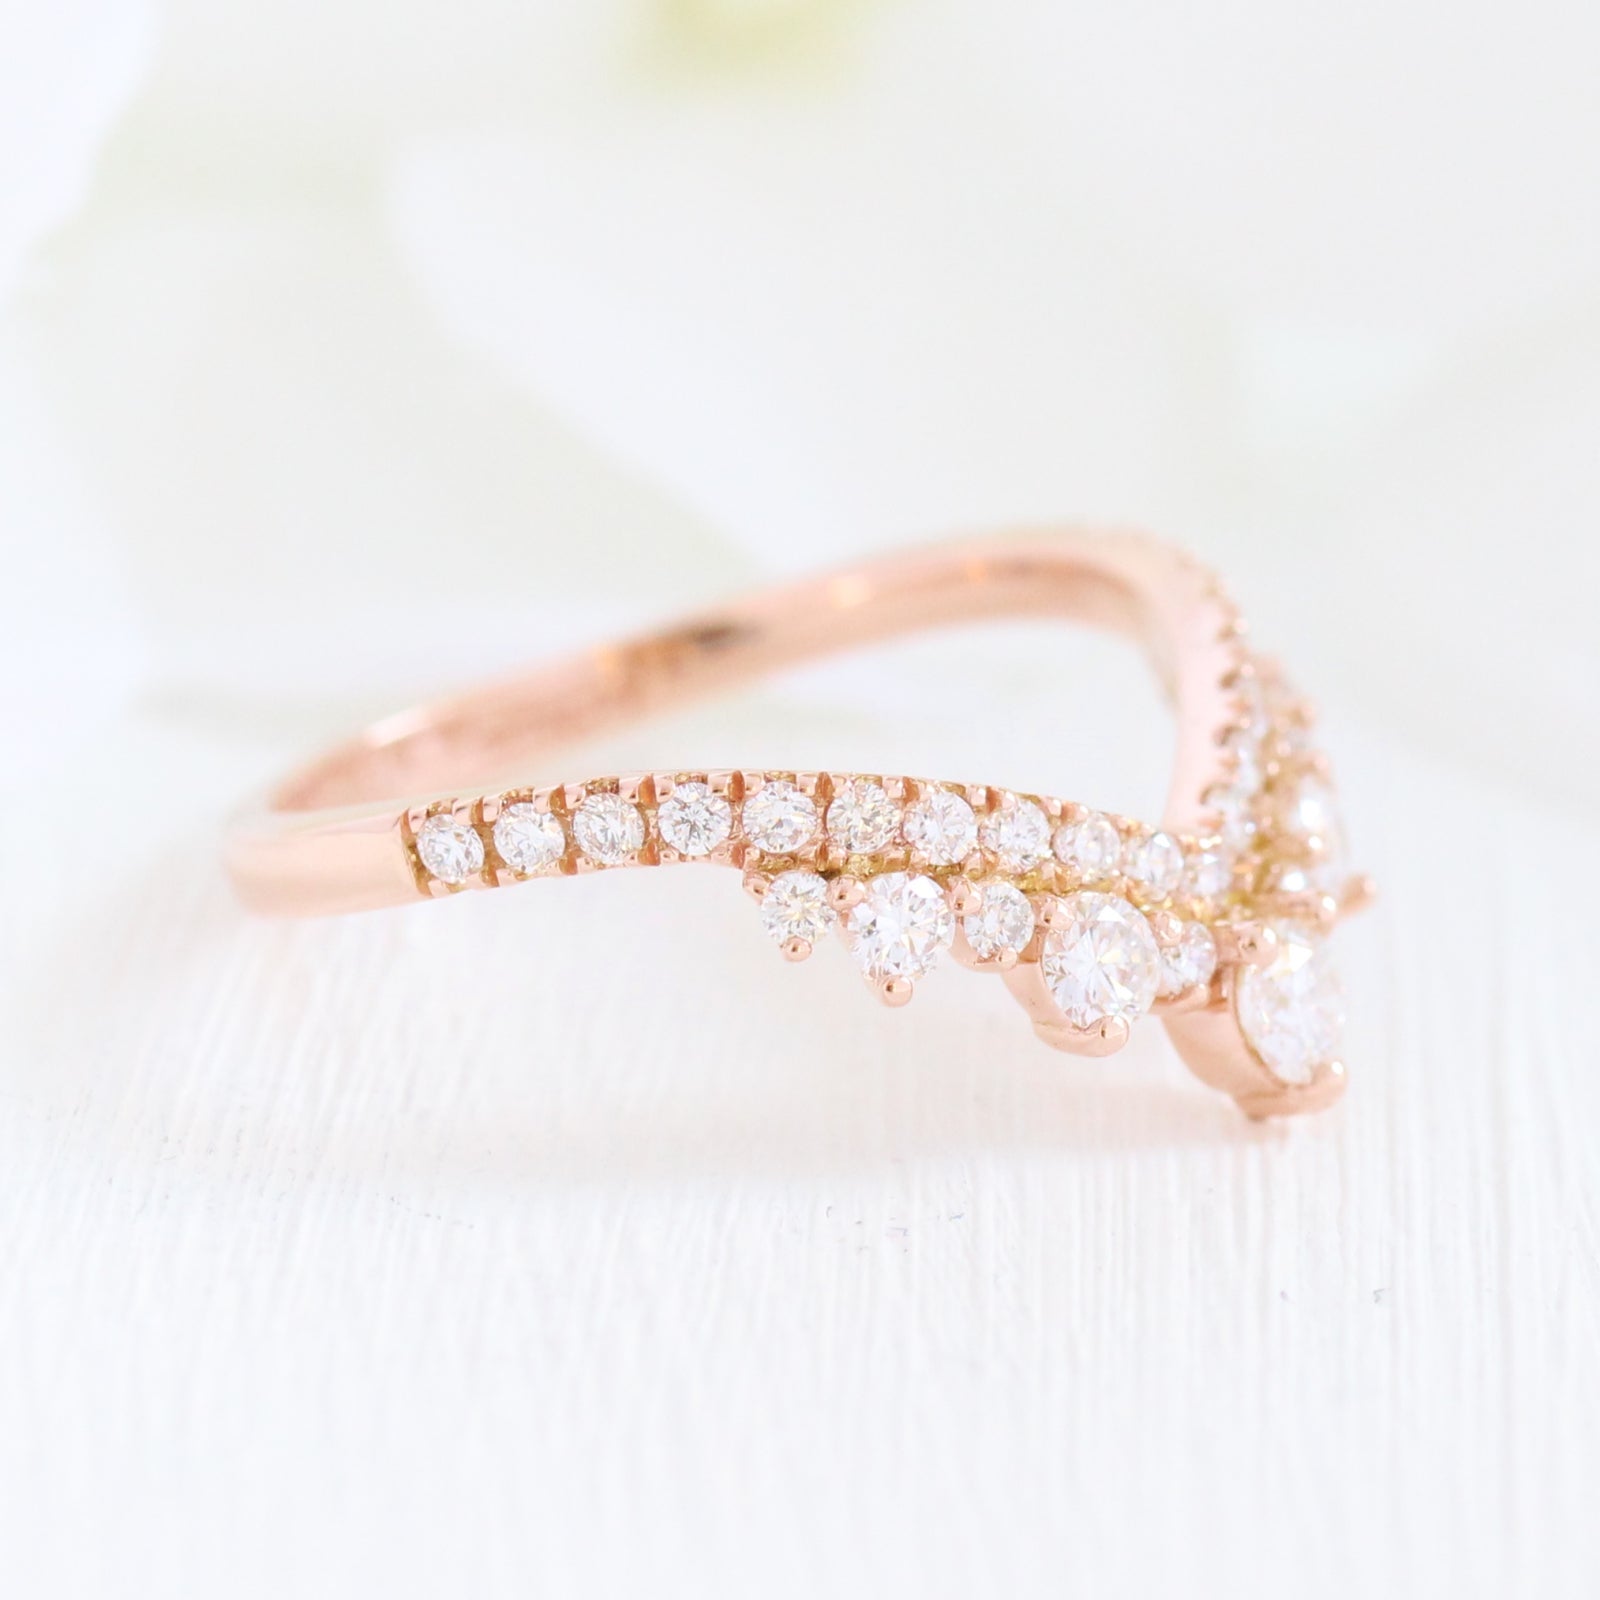 Large diamond wedding ring rose gold curved pave diamond band by la more design jewelry